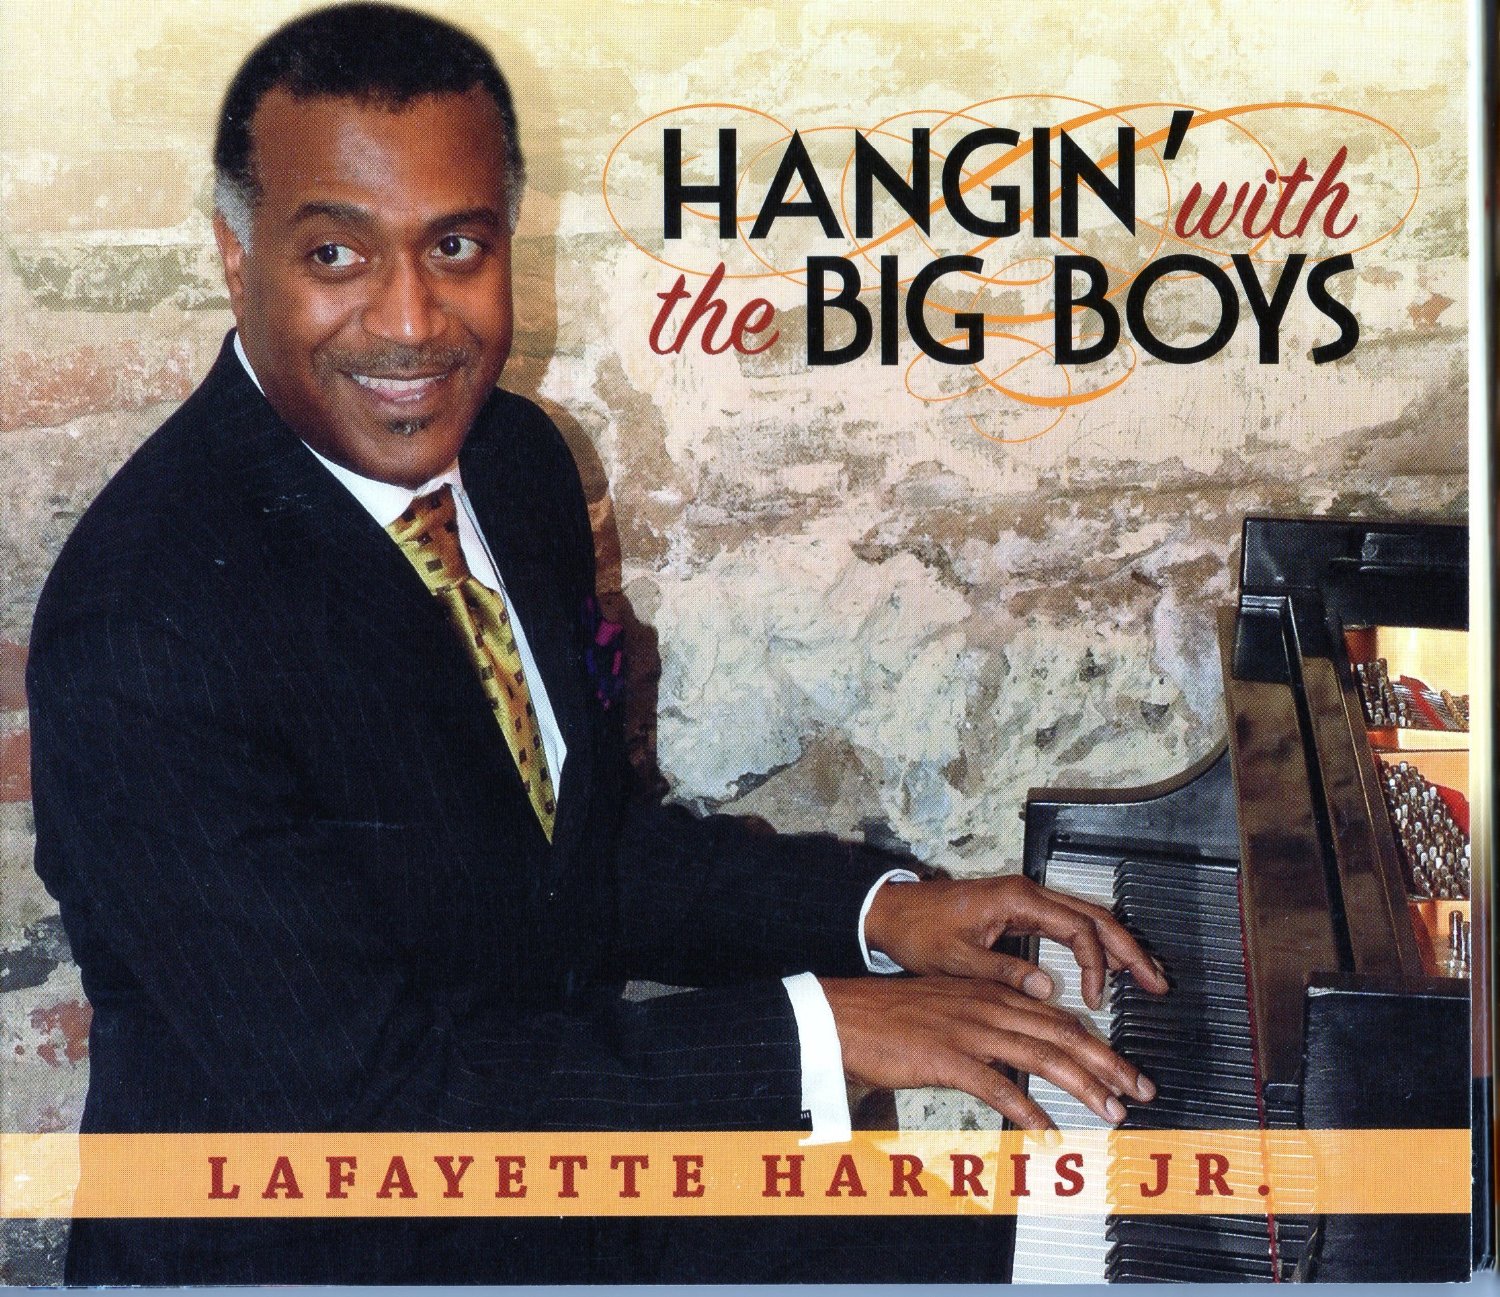 LAFAYETTE HARRIS JR - Hangin' with the Big Boys cover 